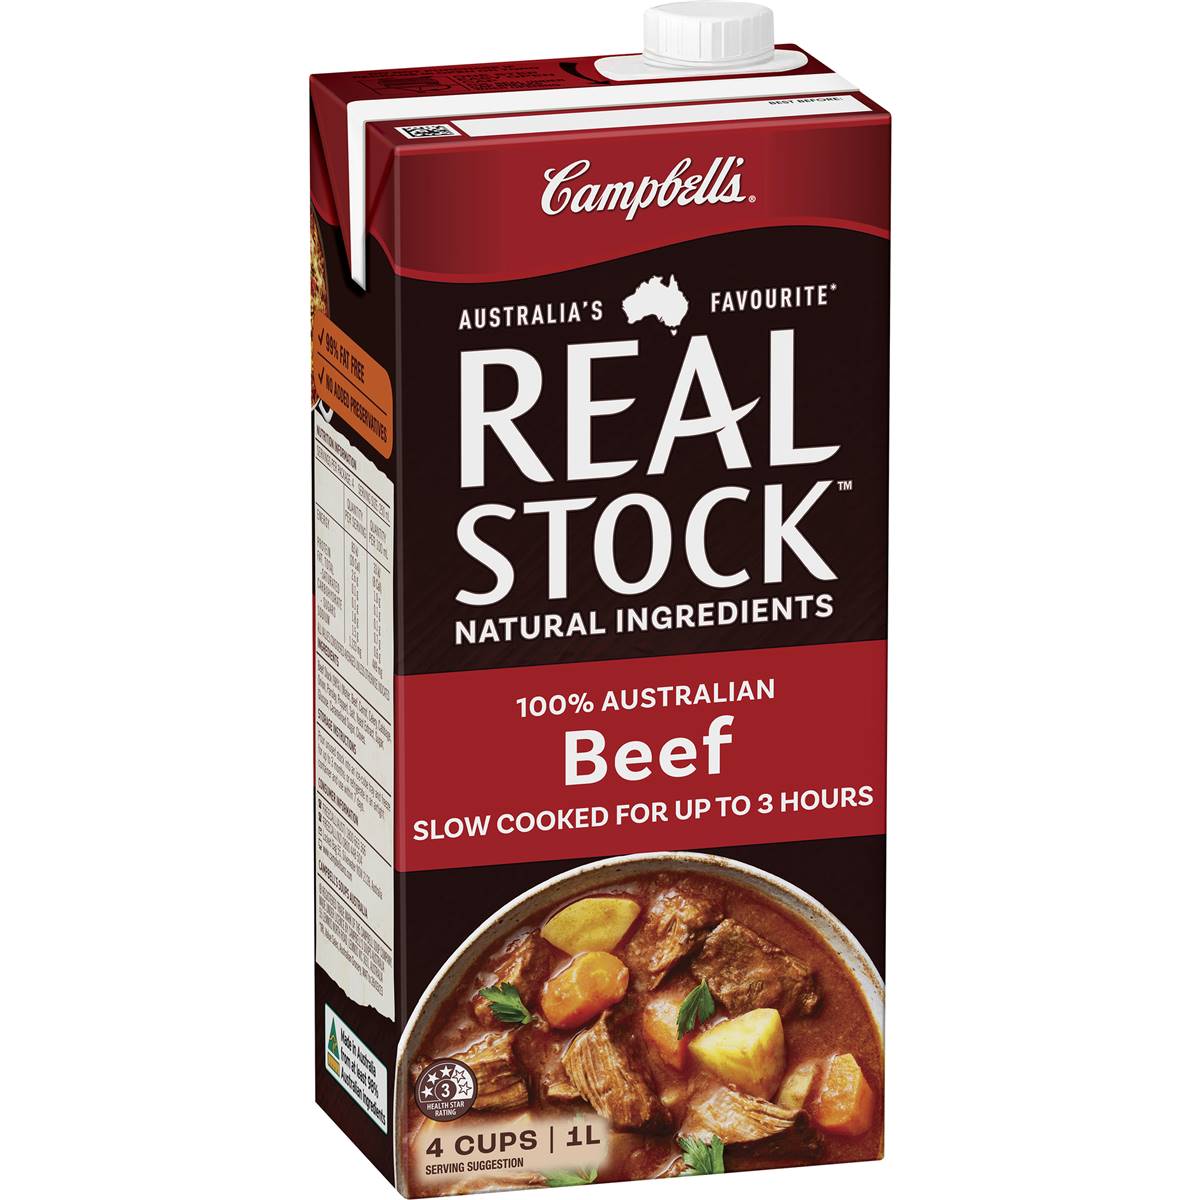 Calories in Campbell's Real Stock Beef Liquid Stock